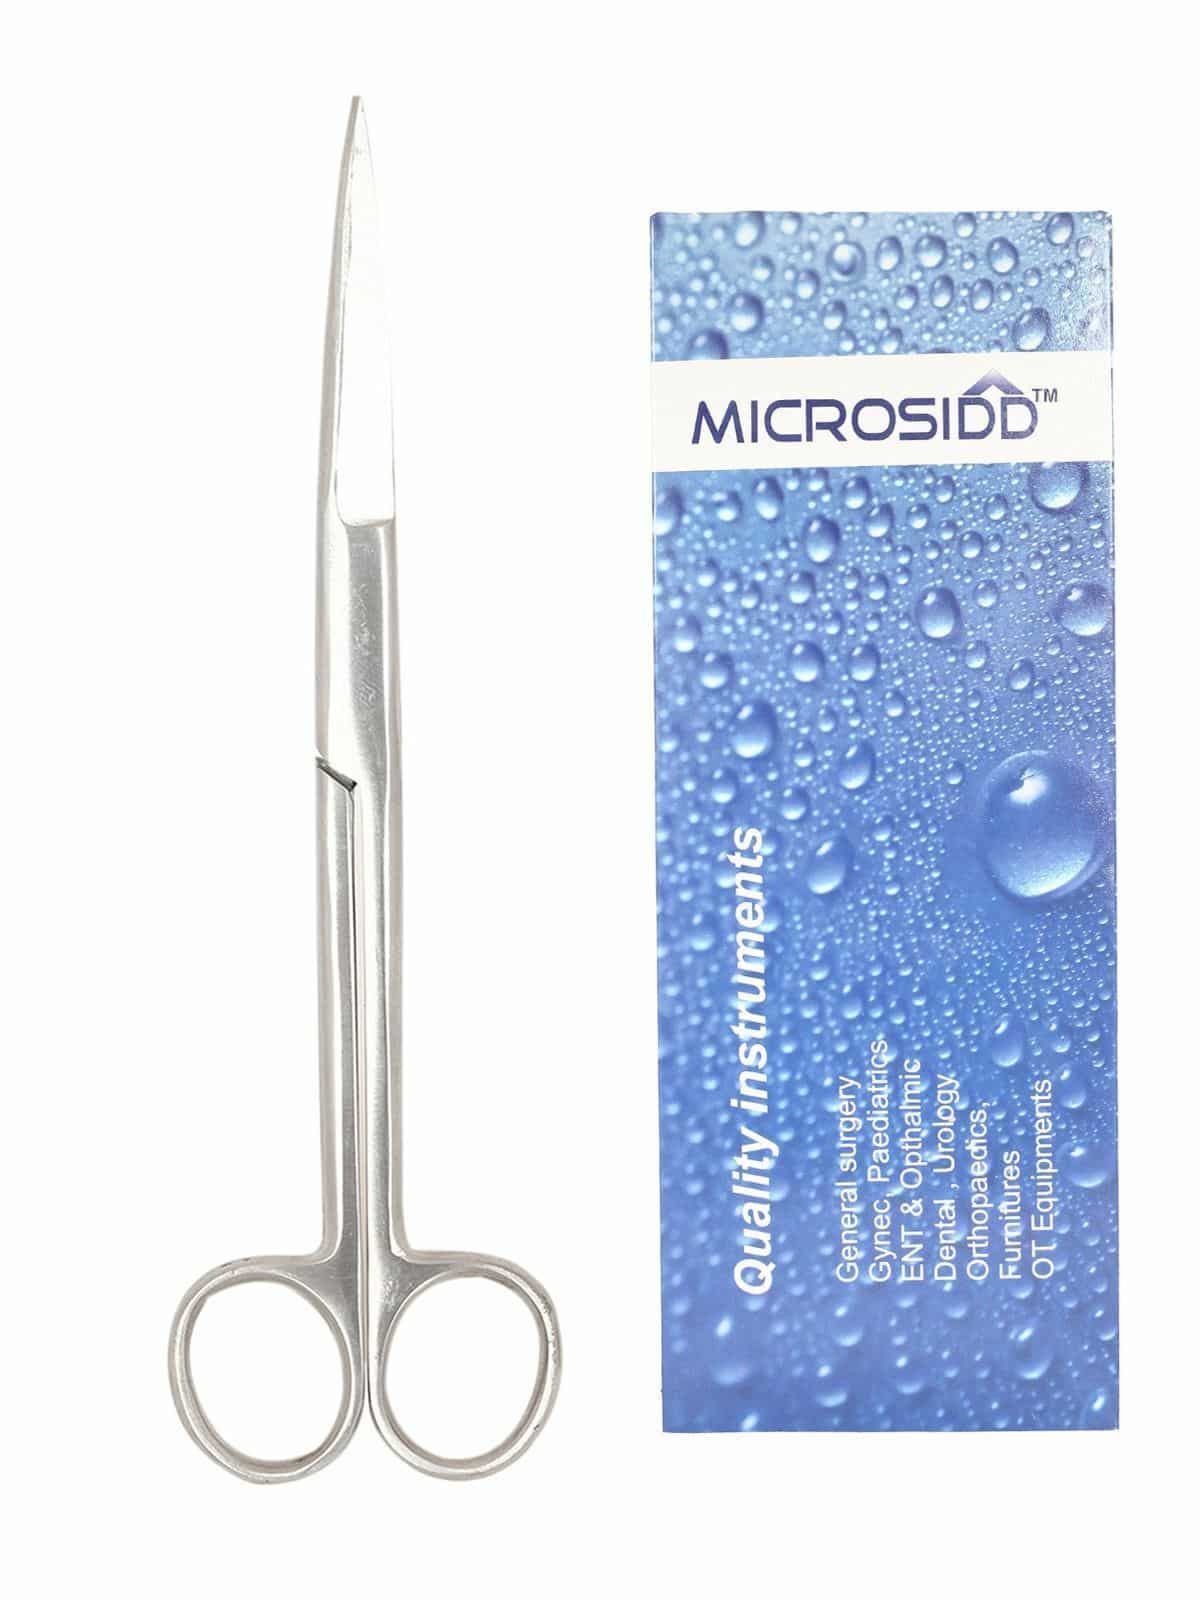 Microsidd Surgical Dissecting Scissor 6 inches Straight ( both sharp blades) Imported